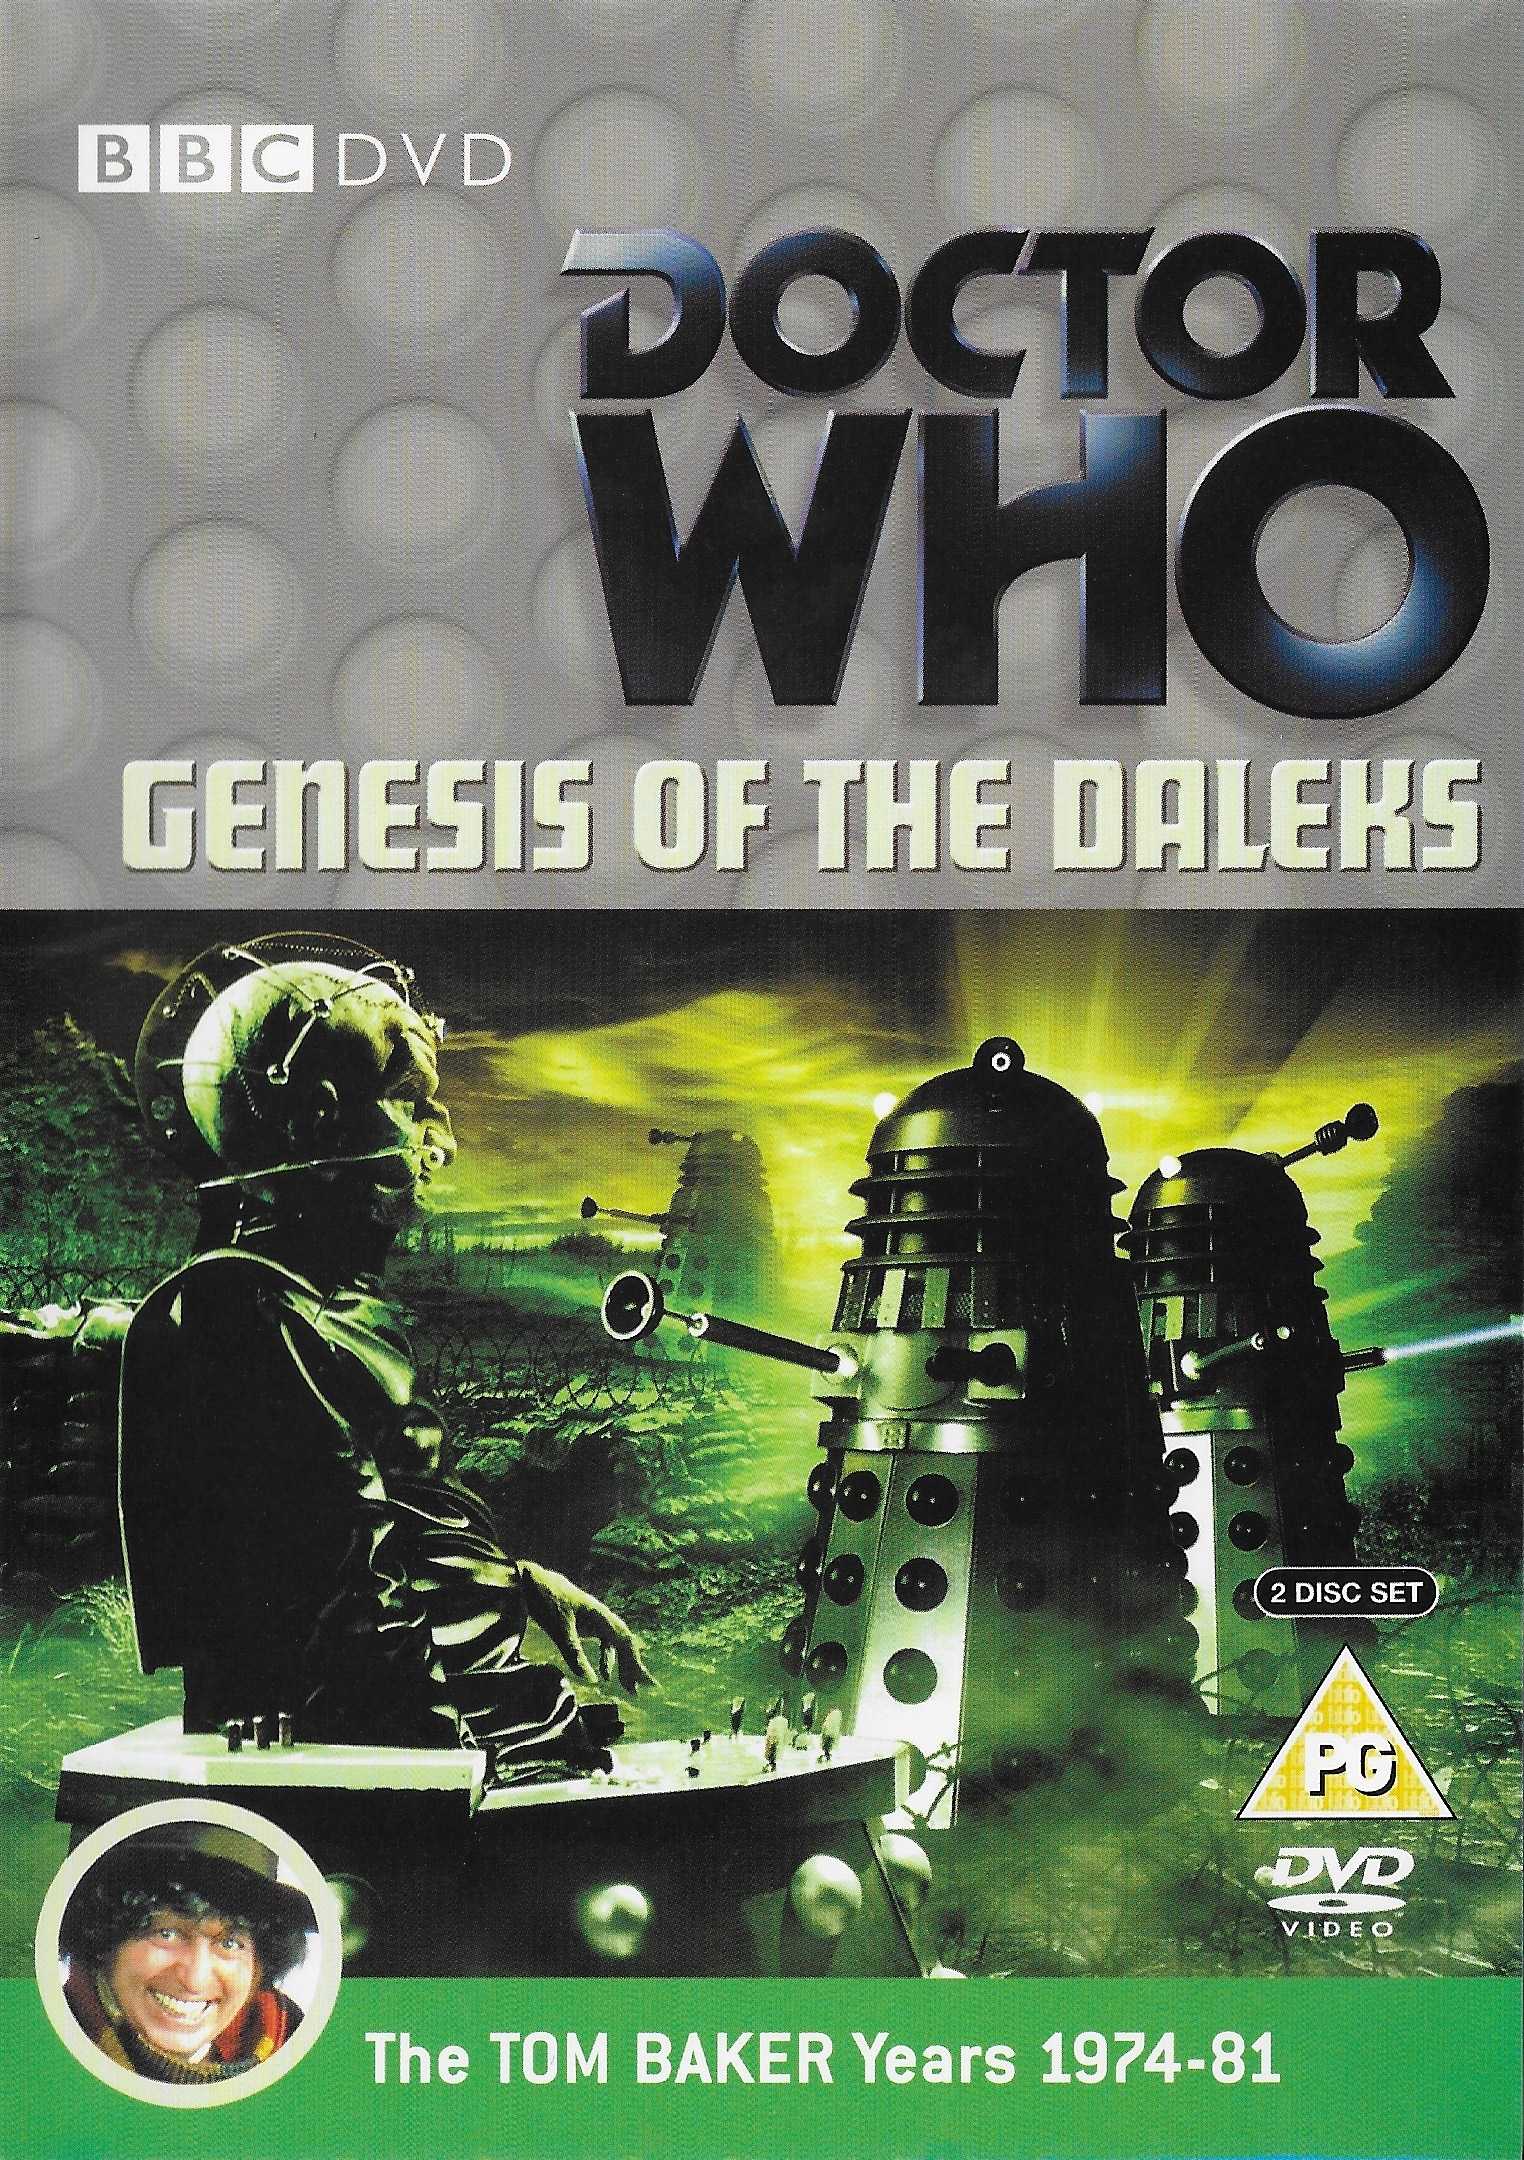 Picture of BBCDVD 1813 Doctor Who - Genesis of the Daleks by artist Terry Nation from the BBC records and Tapes library